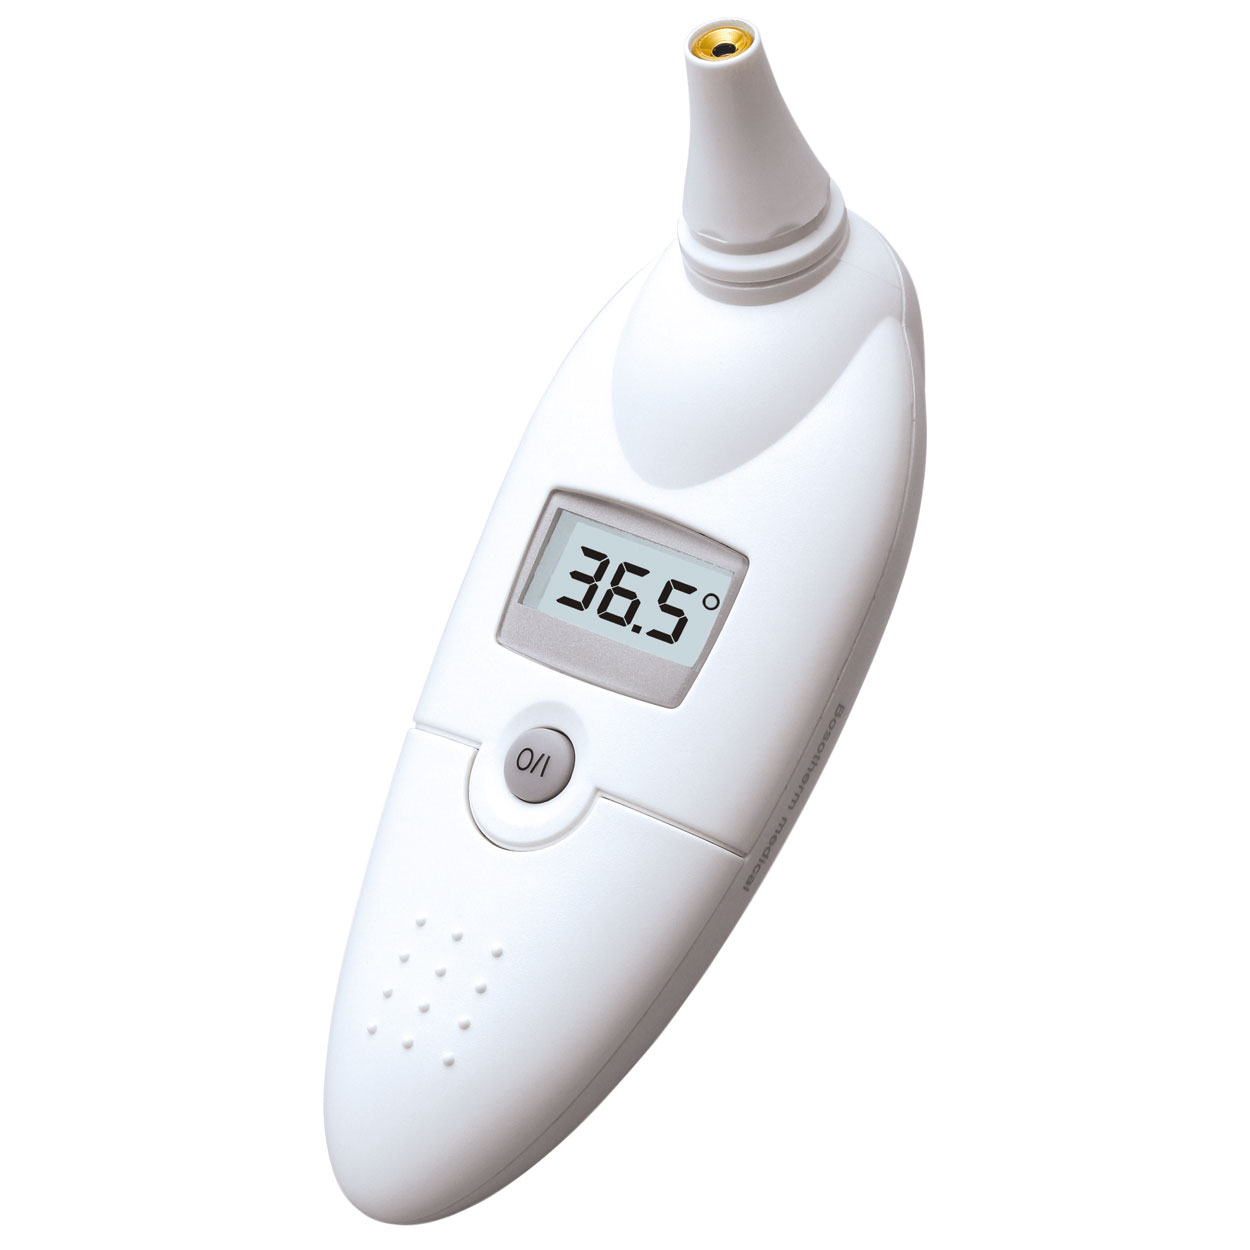 Boso Fieberthermometer bosotherm medical Infrarot, Ohrthermometer